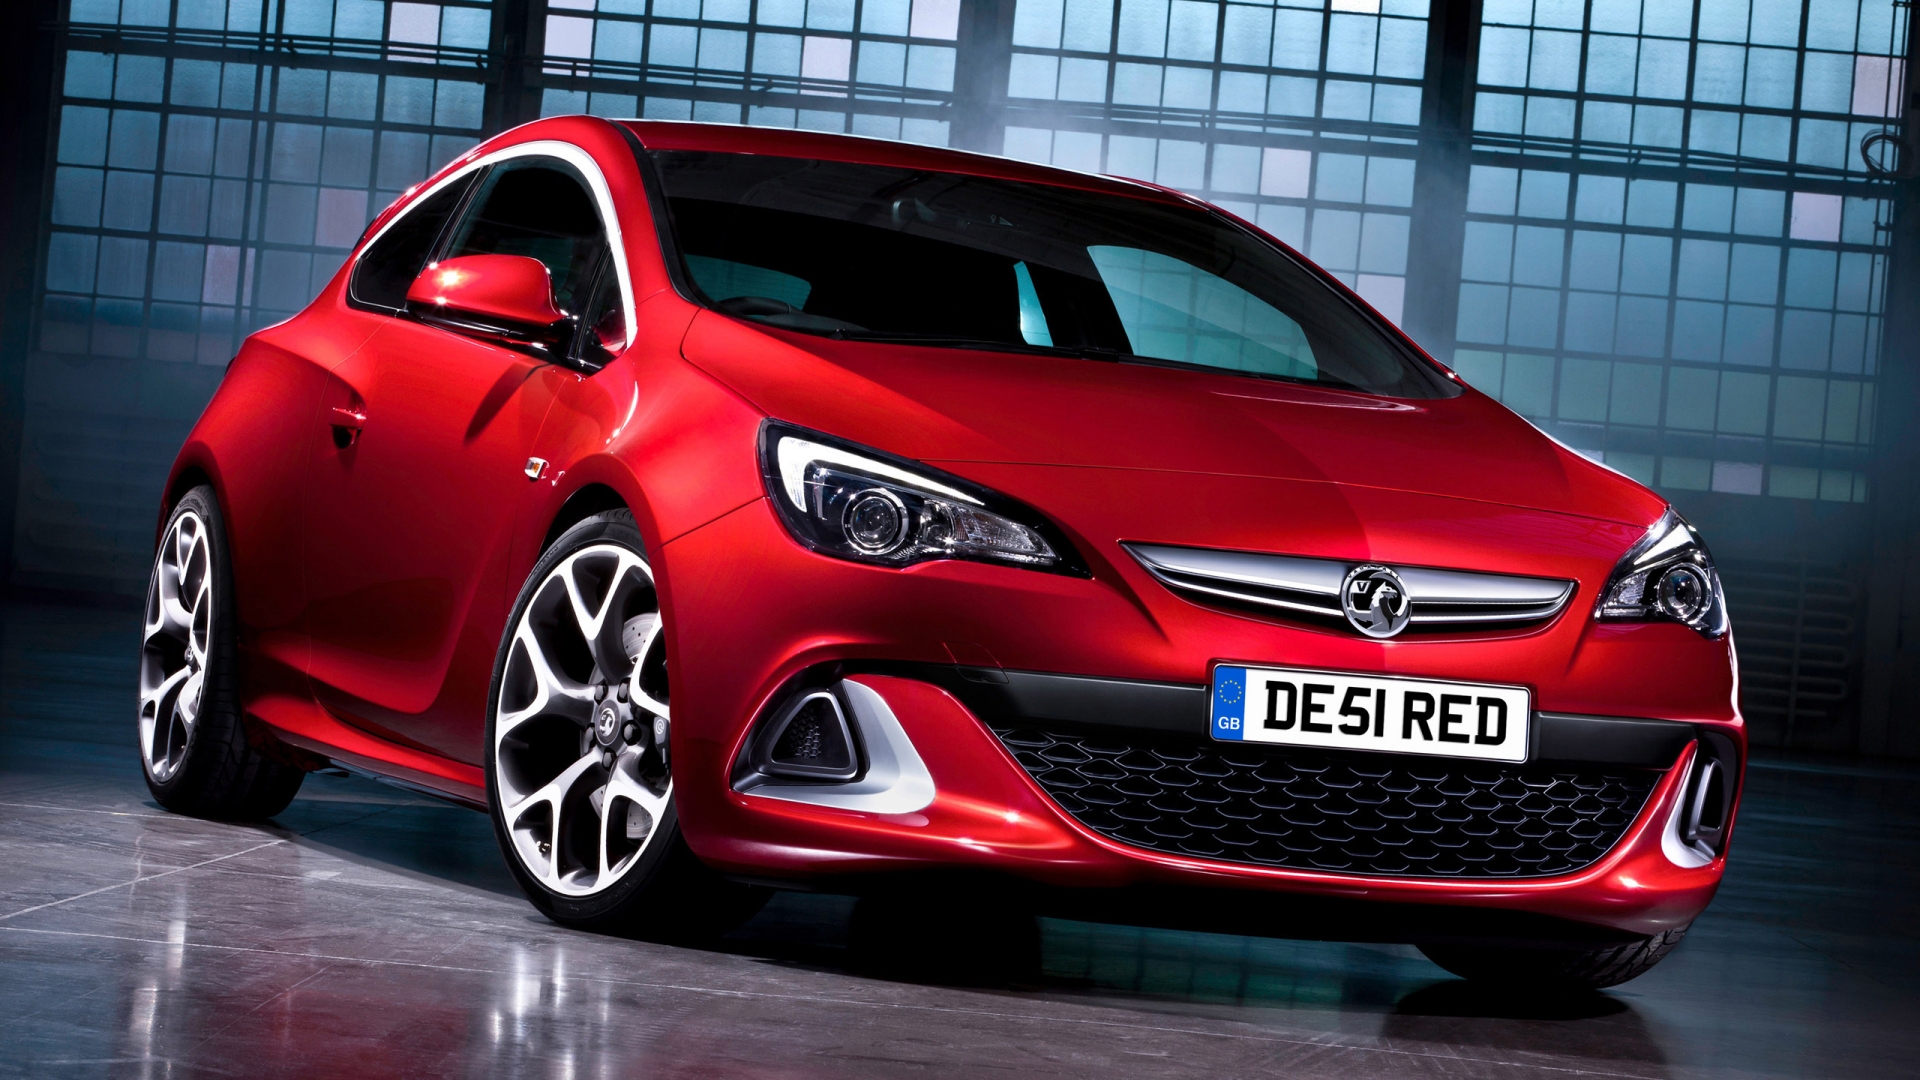 2012 Vauxhall Astra GTC for 1920 x 1080 HDTV 1080p resolution